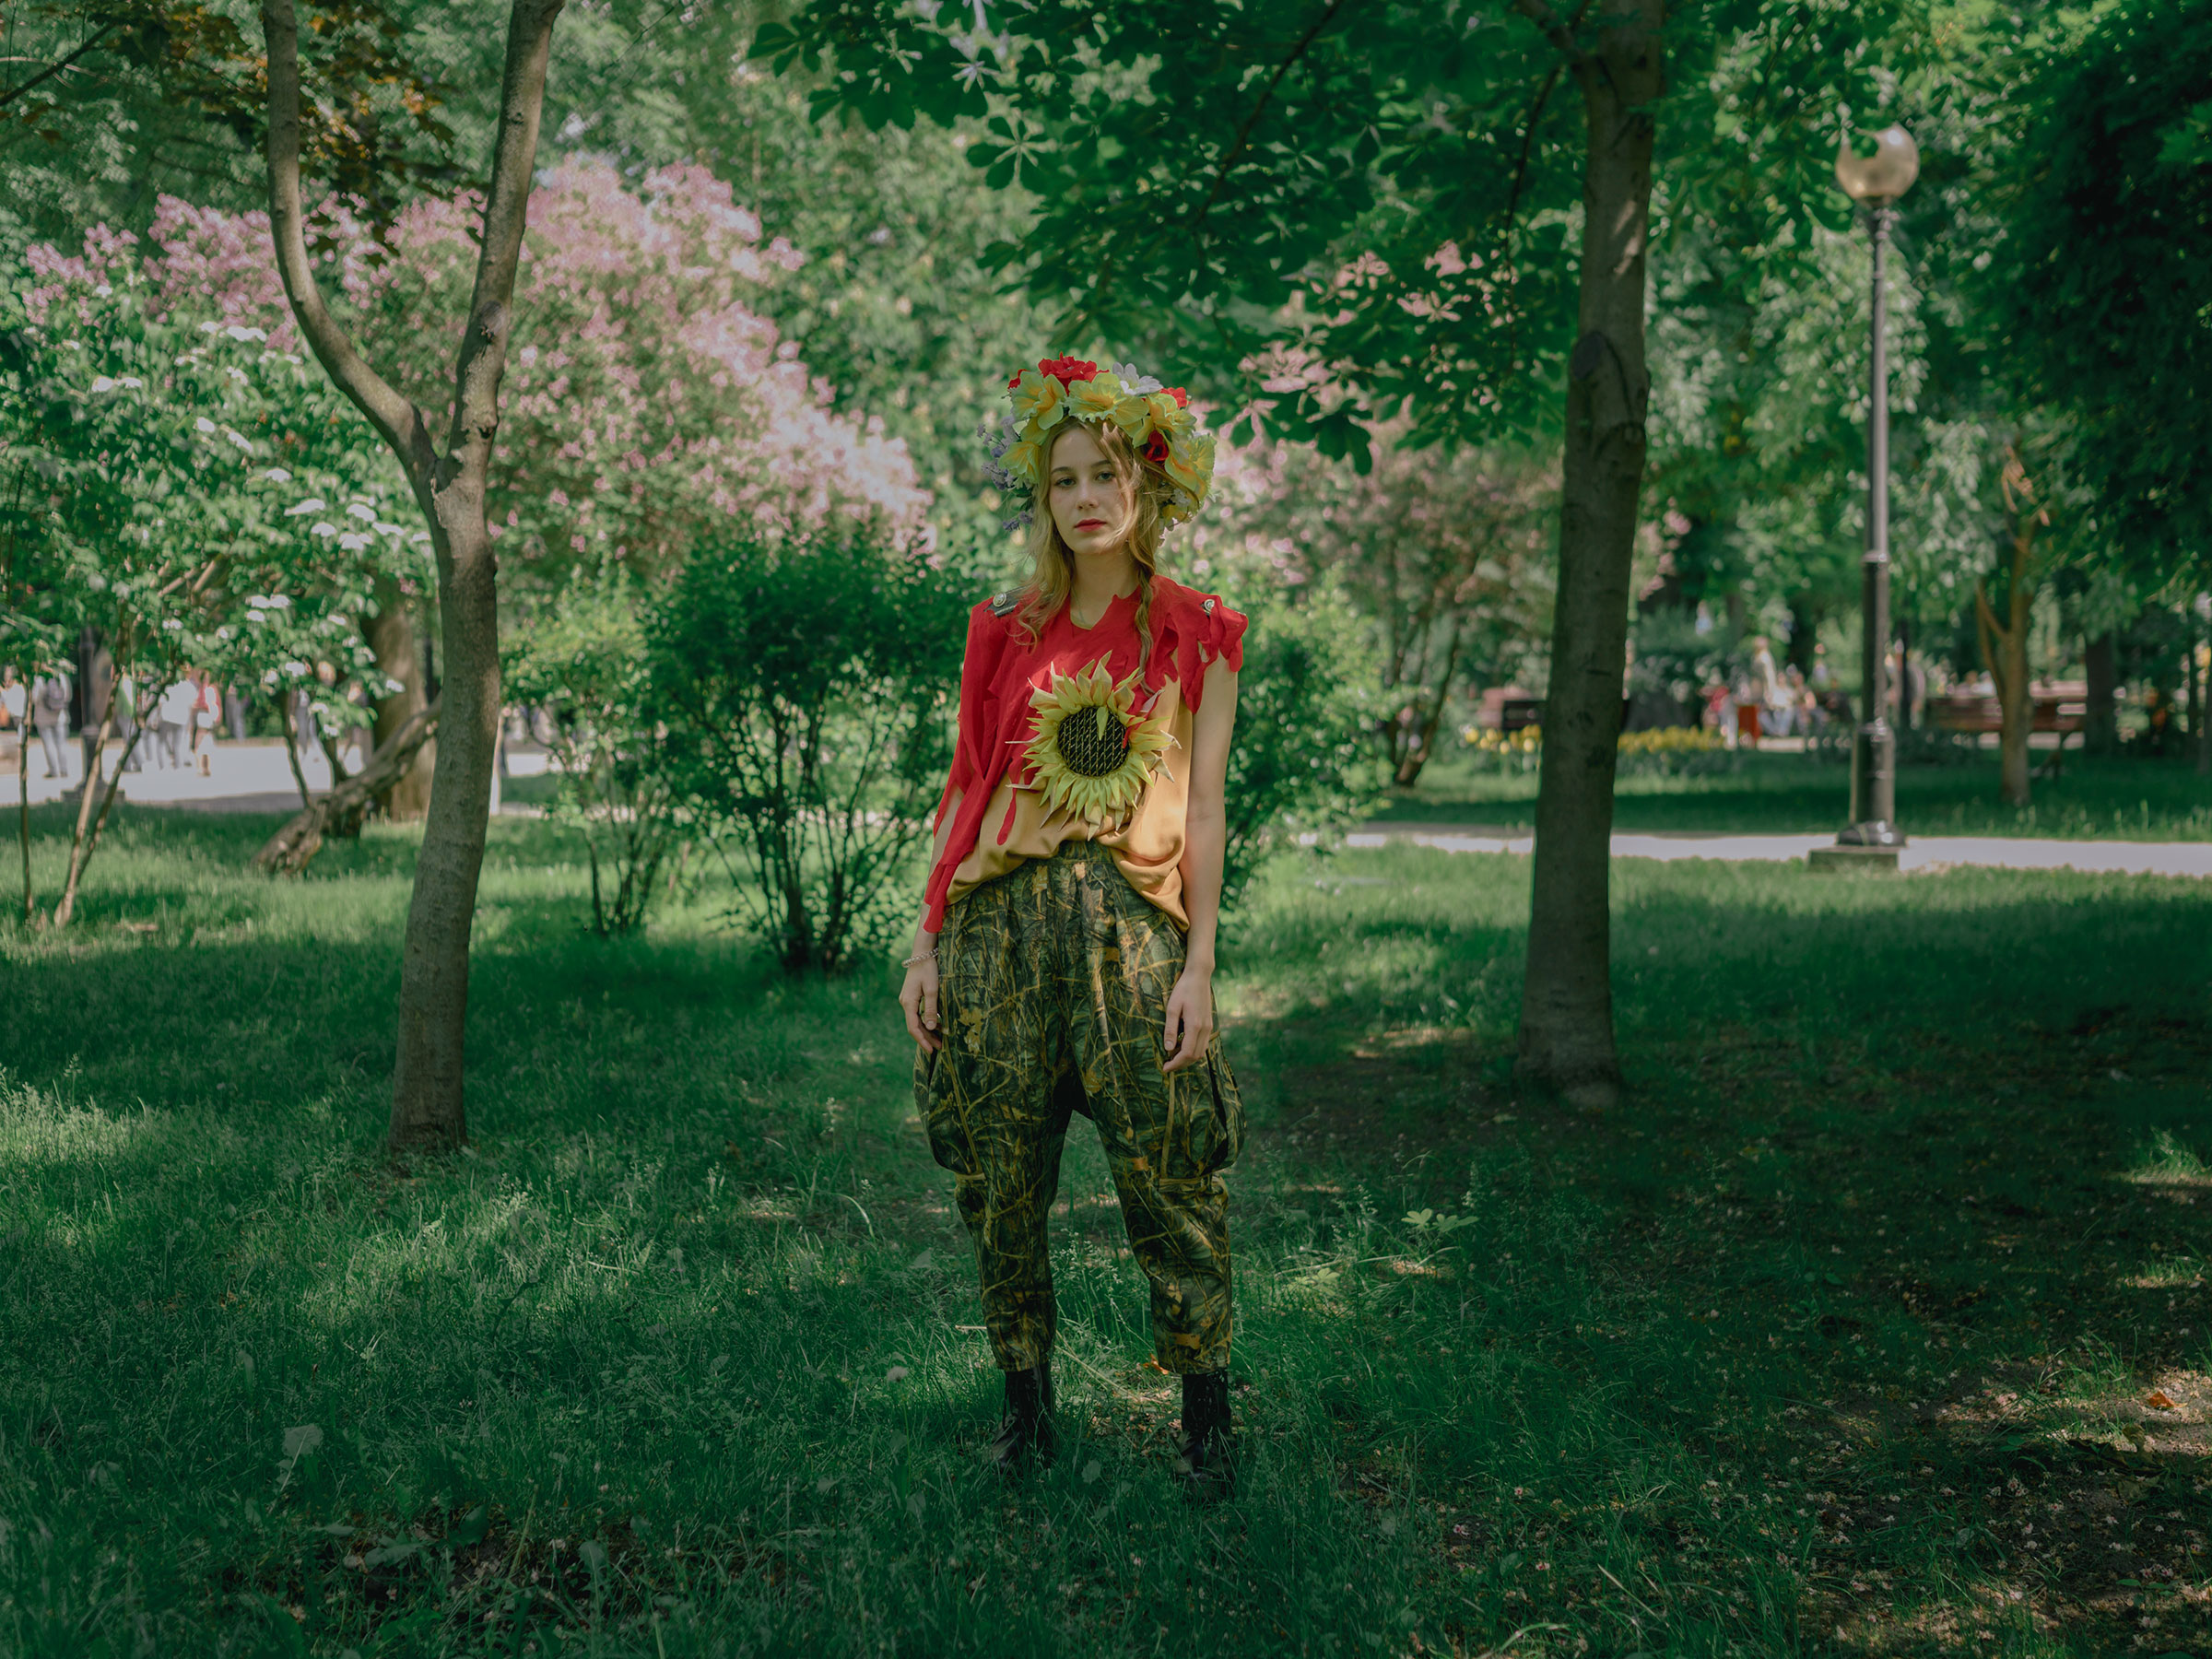 Ksenia poses for a portrait in Shevchenko Park. She is grateful that she can still live in Kyiv. (Fabian Ritter—DOCKS Collective)